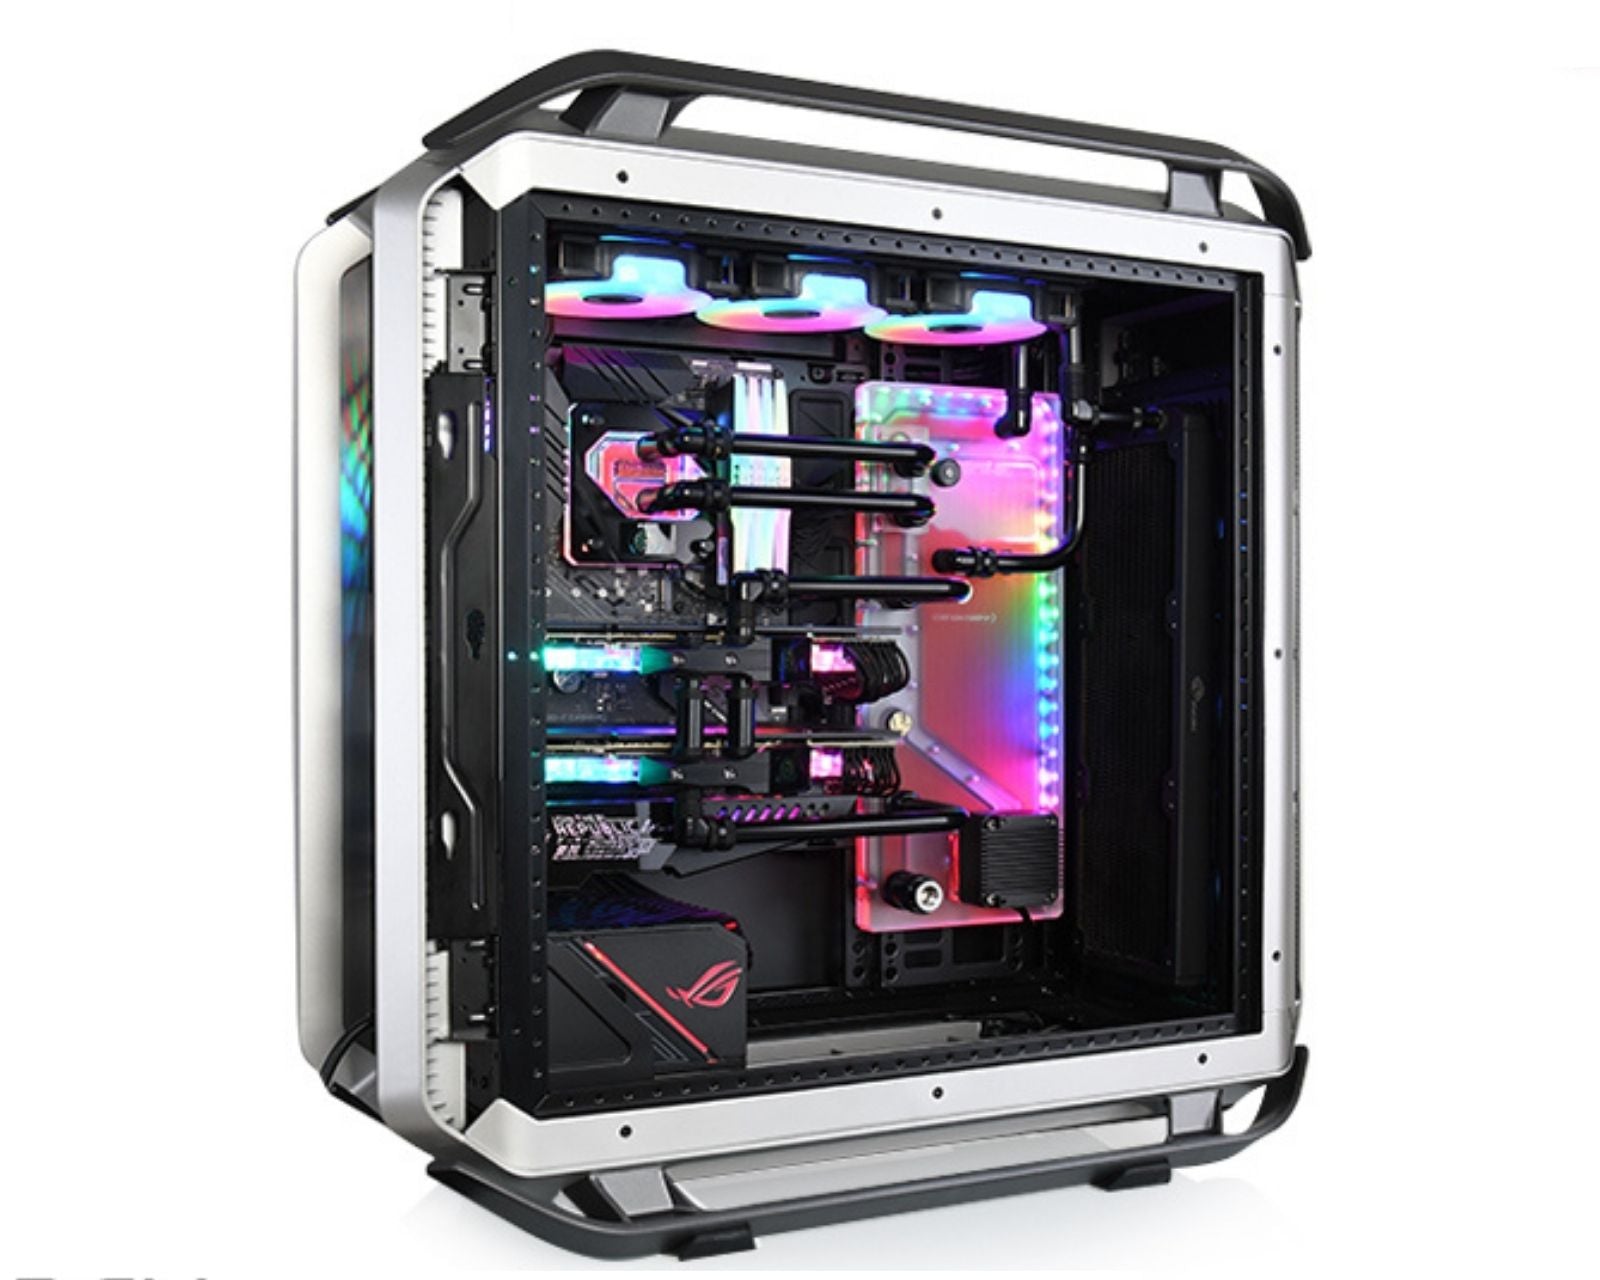 Bykski Distro Plate For Cooler Master C700P/700M Frosted PMMA w/ 5v Addressable RGB(RBW) (RGV-CM-700P-P-F-K)